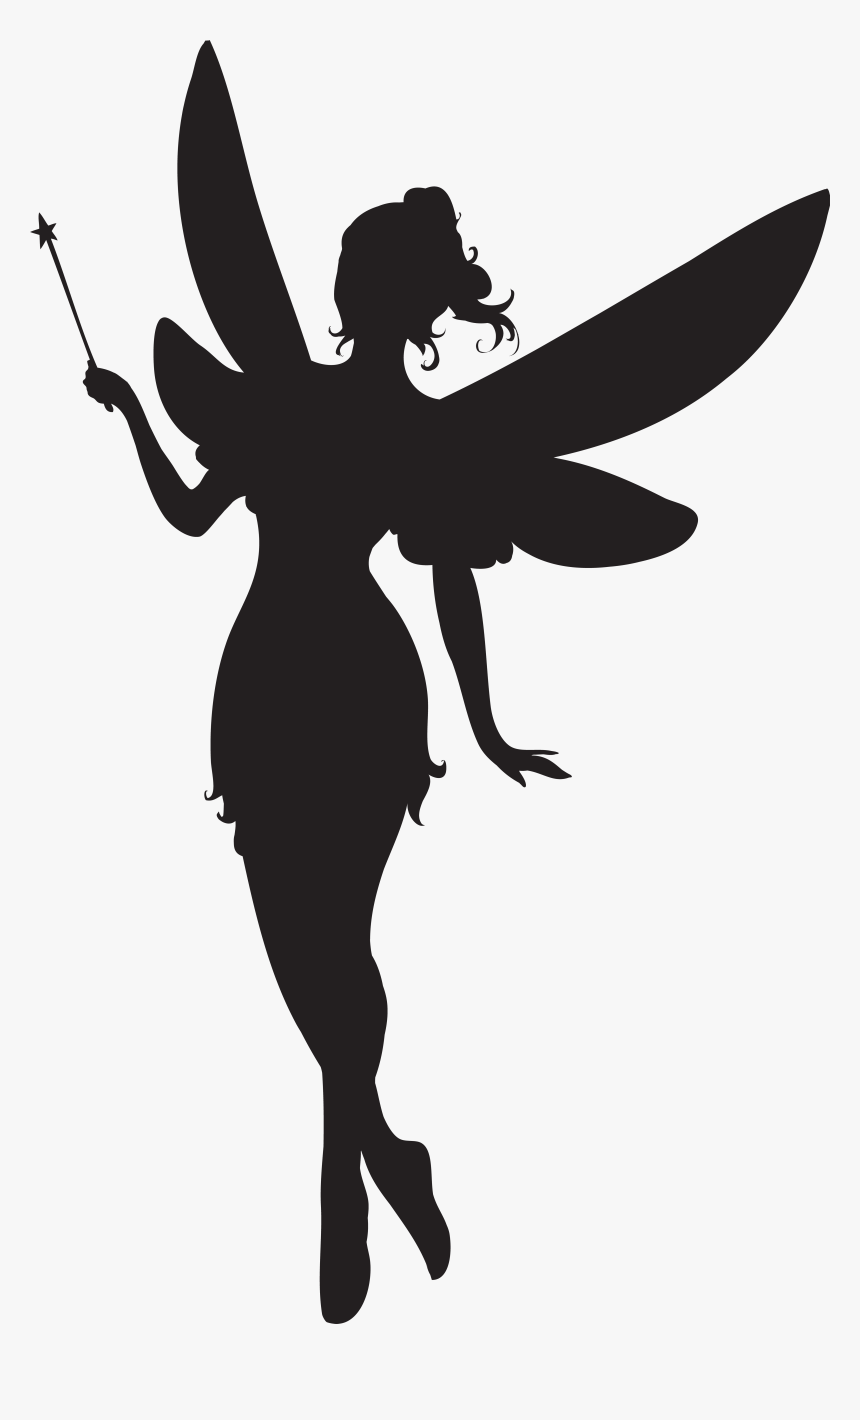 Fairy Silhouette Clip Art - Fairy Silhouette Transparent Background, HD Png Download, Free Download